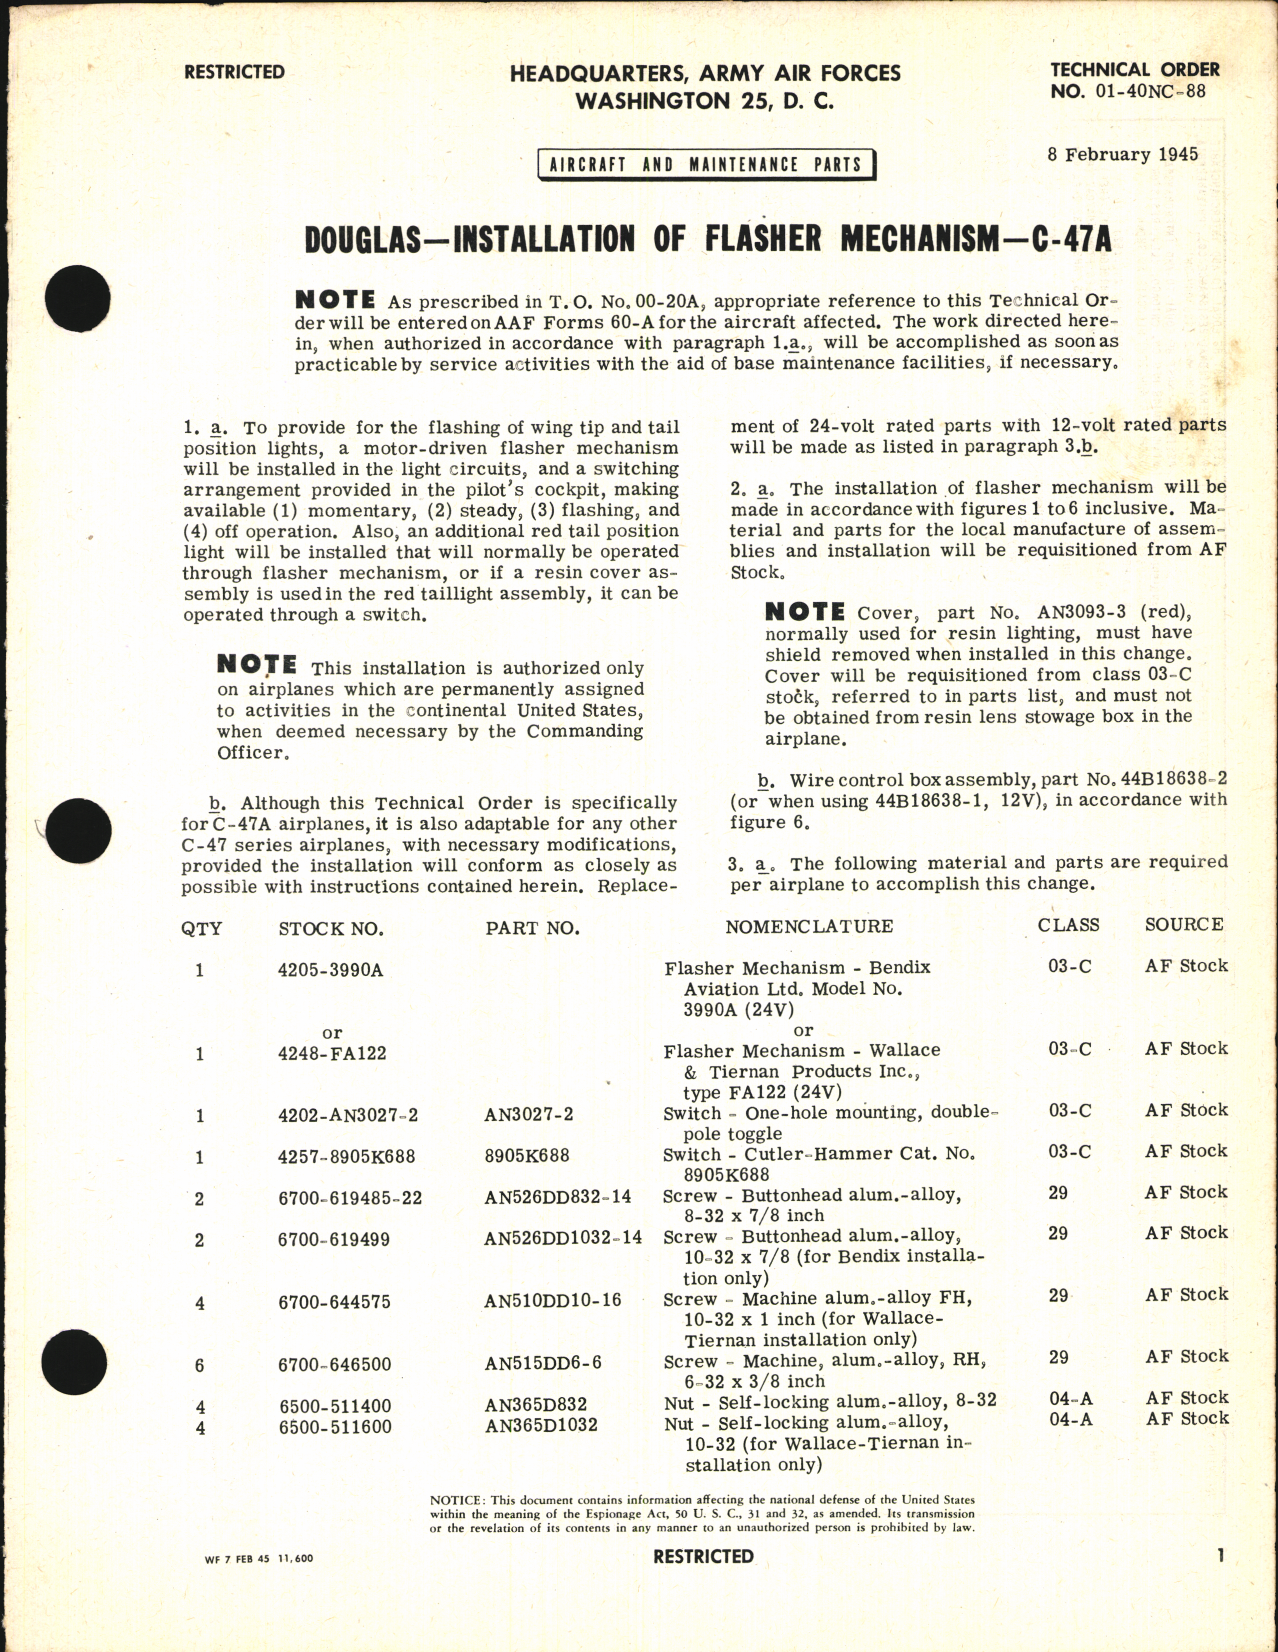 Sample page 1 from AirCorps Library document: Installation of Flasher Mechanism for C-47A